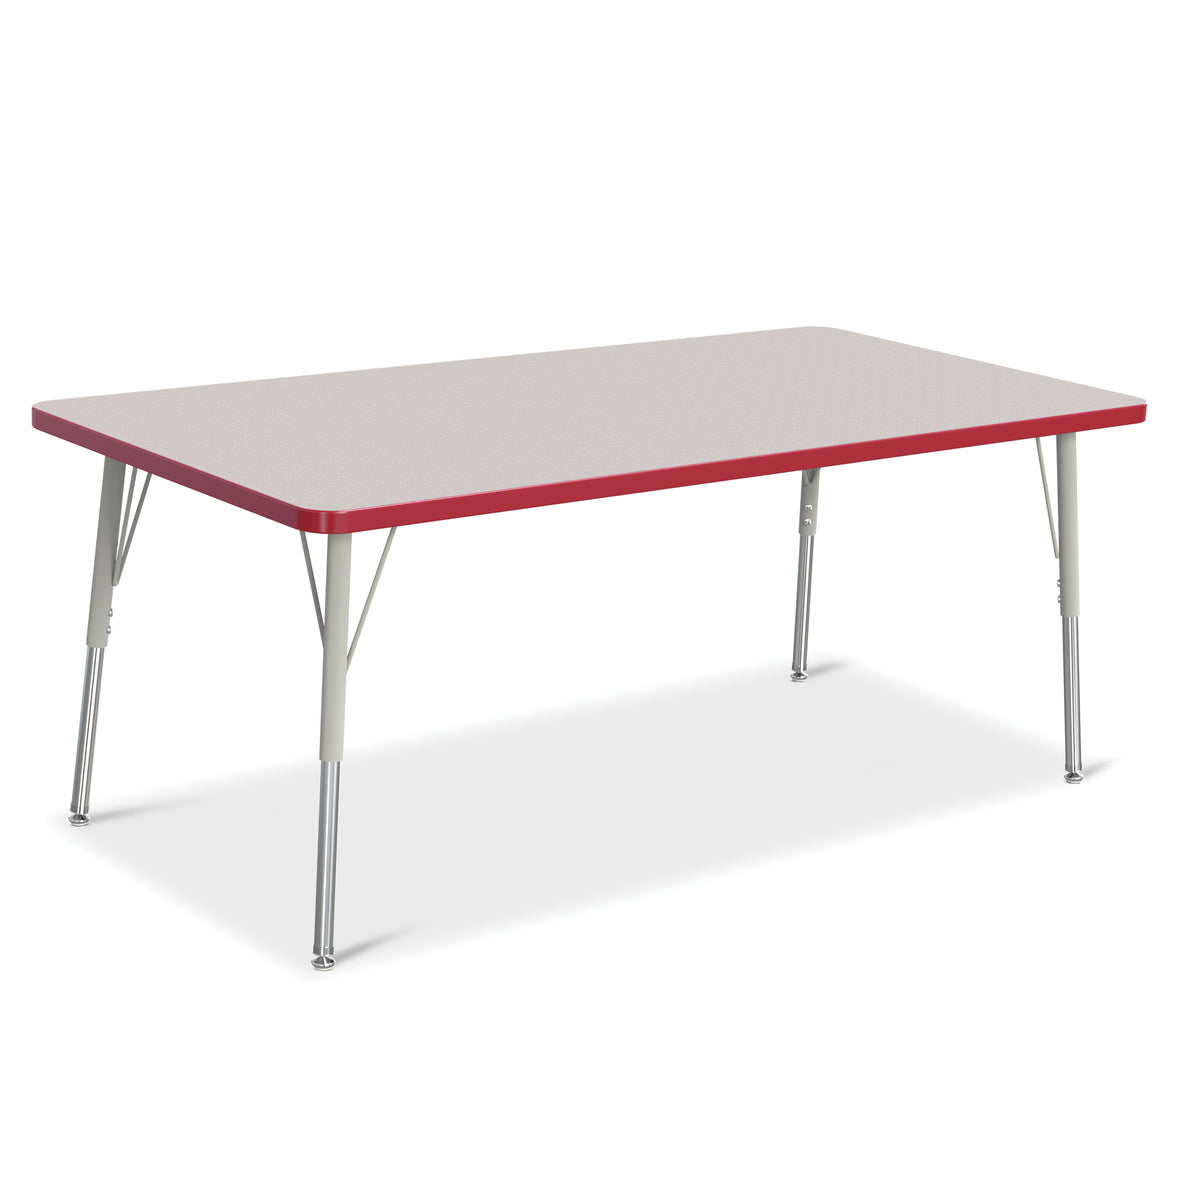 6408JCA008, Berries Rectangle Activity Table - 30" X 60", A-height - Freckled Gray/Red/Gray